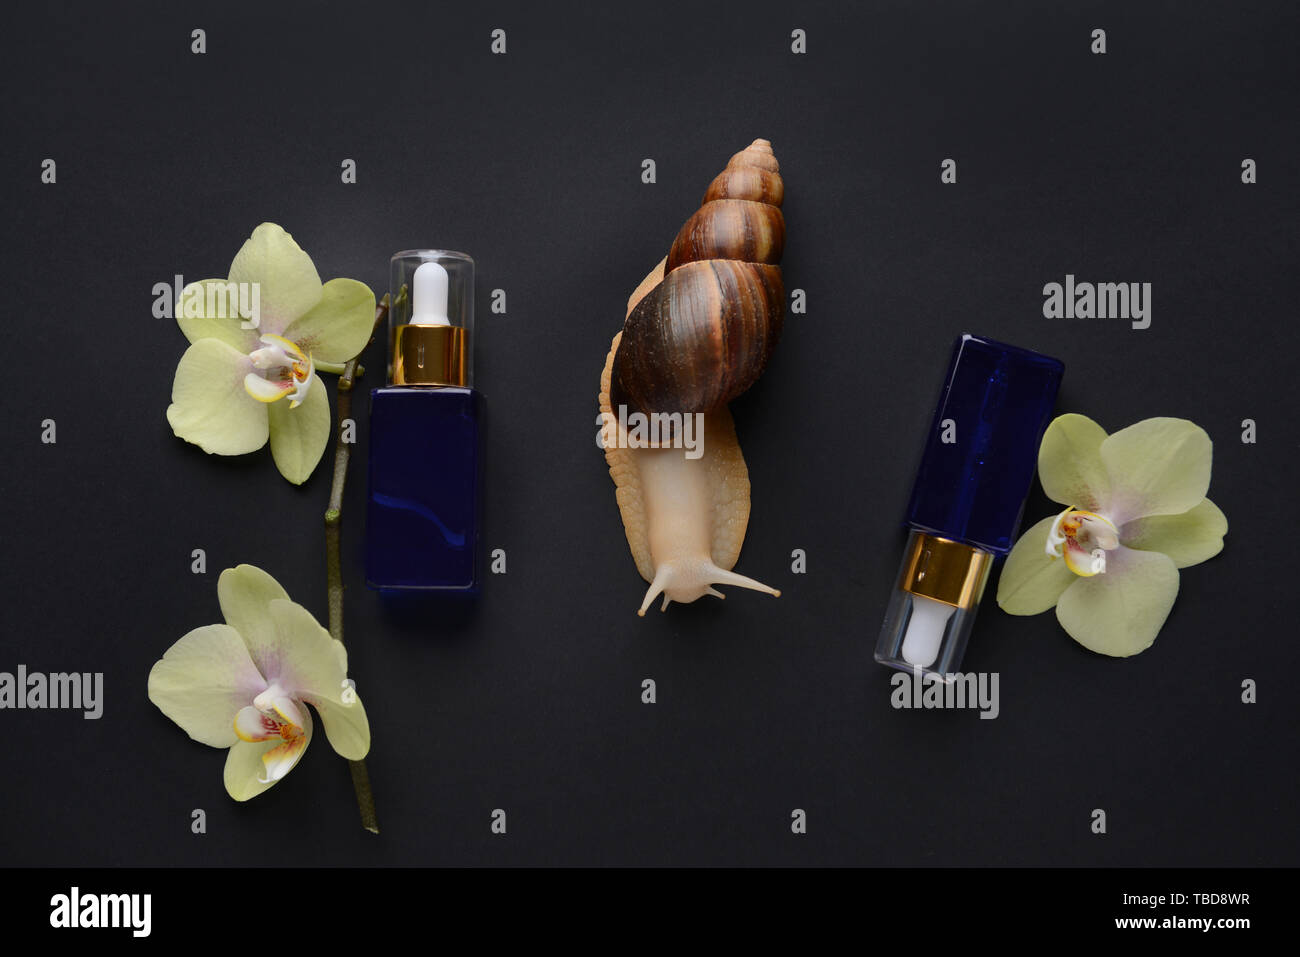 Giant Achatina snail, flowers and cosmetics on dark background Stock Photo